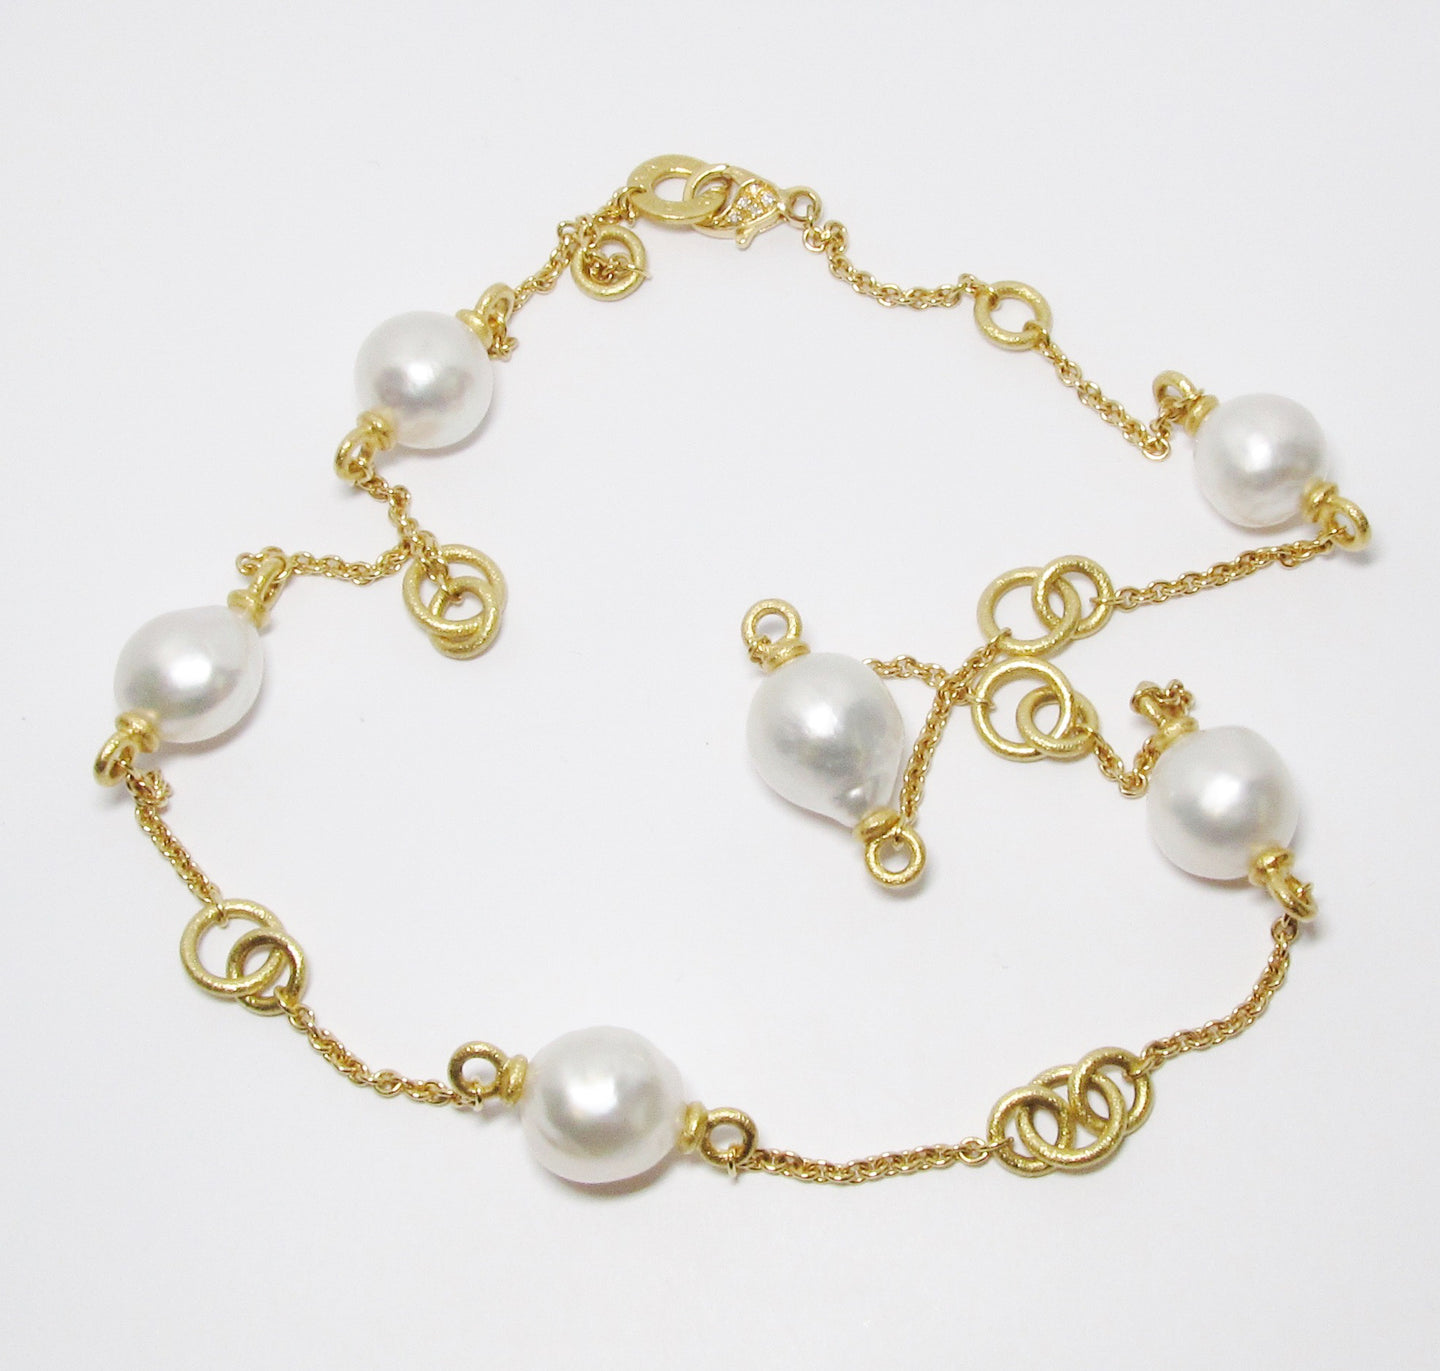 18k Yellow Gold Chain Link Necklace with Fresh Water Pearls